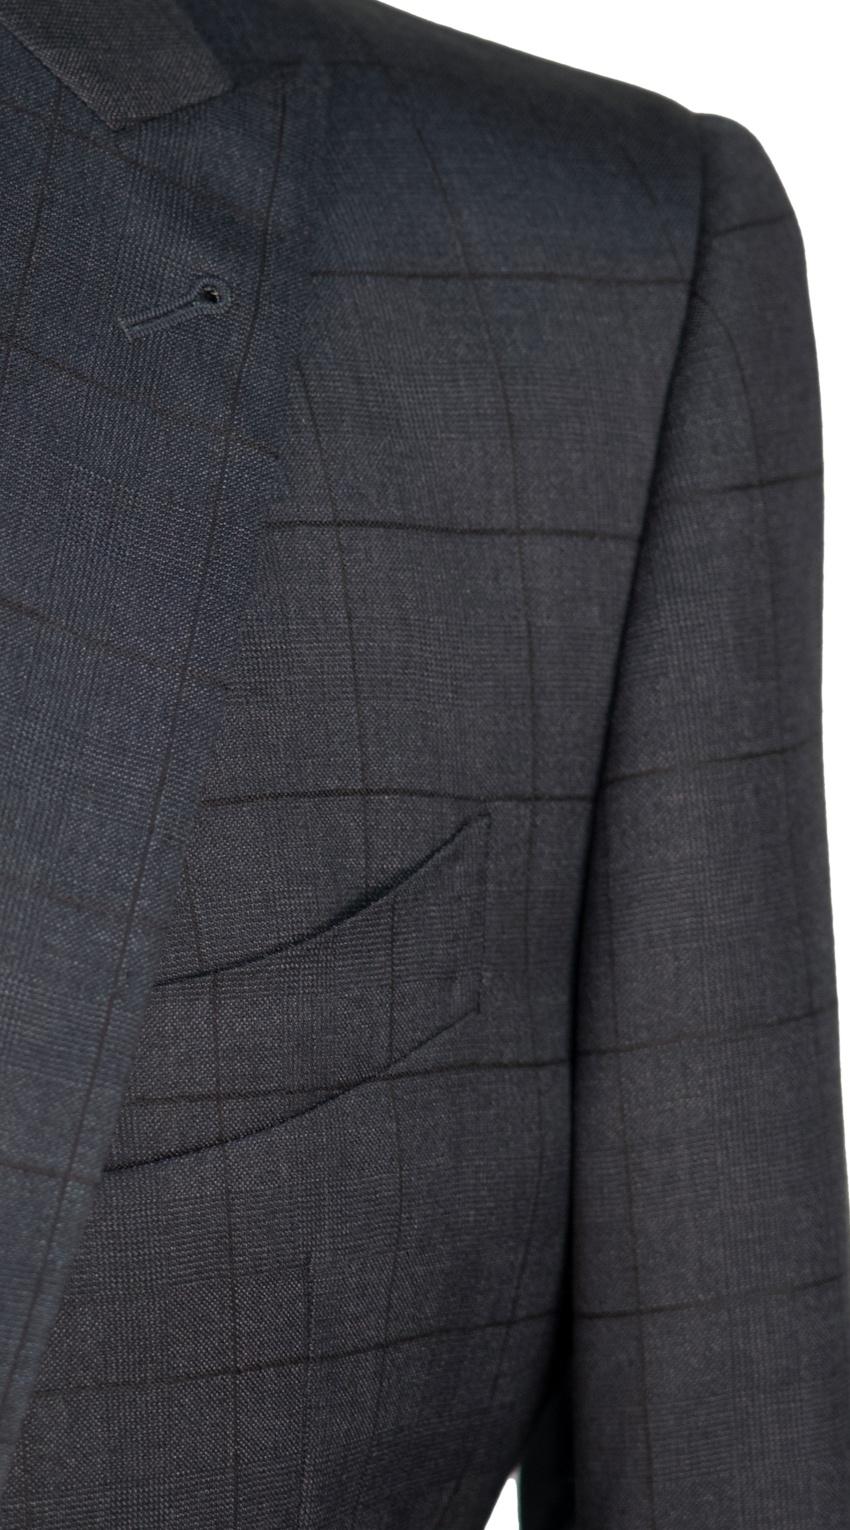 Charcoal Prince of Wales Check Suit